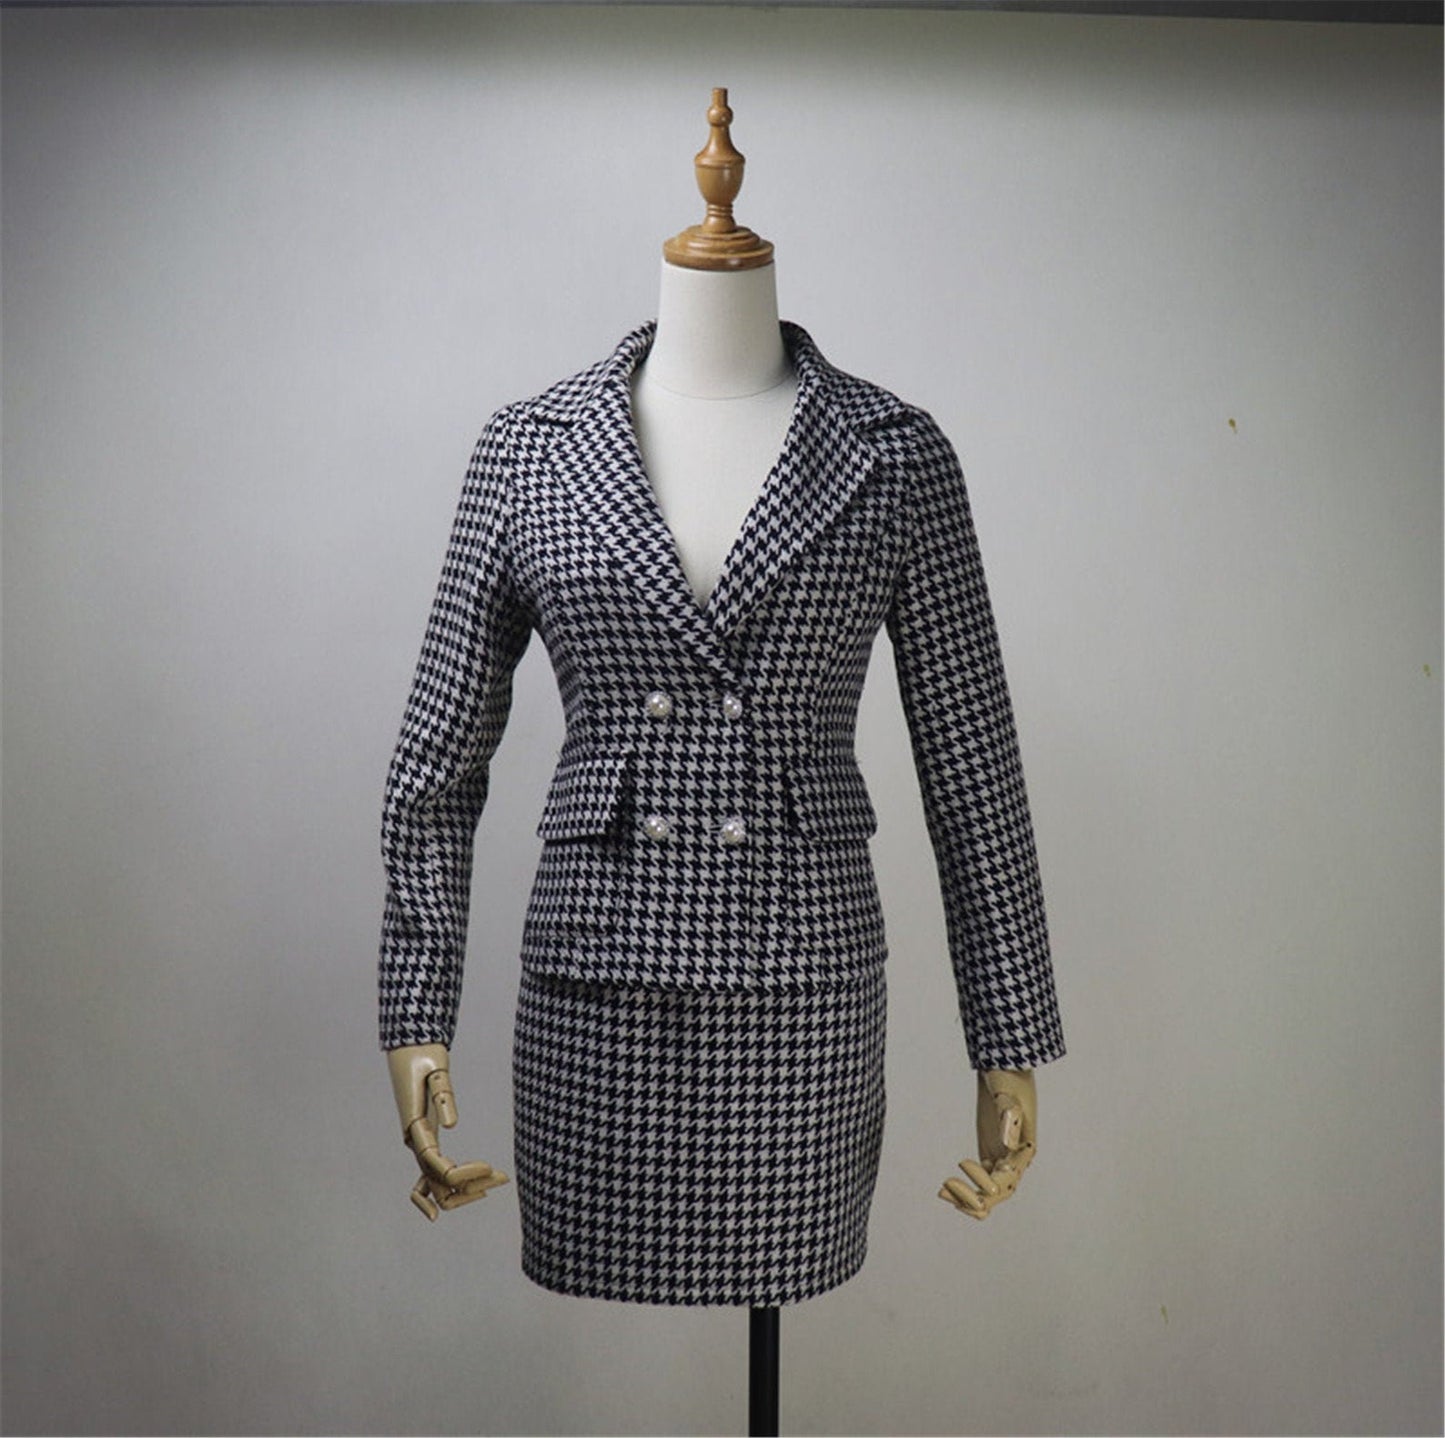 Women CUSTOM MADE Classic Houndstooth Tweed Jacket Coat Blazer+ Skirts  UK CUSTOMER SERVICE!  All of our suits can be made with a Skirt or a pair of Shorts or Trousers.  All items are made to order with very experienced tailors. Please advise your height, weight and body measurements ( Bust, shoulder, Sleeves, Waist and Length etc). Our tailors will make the order for you!  Materials: tweed